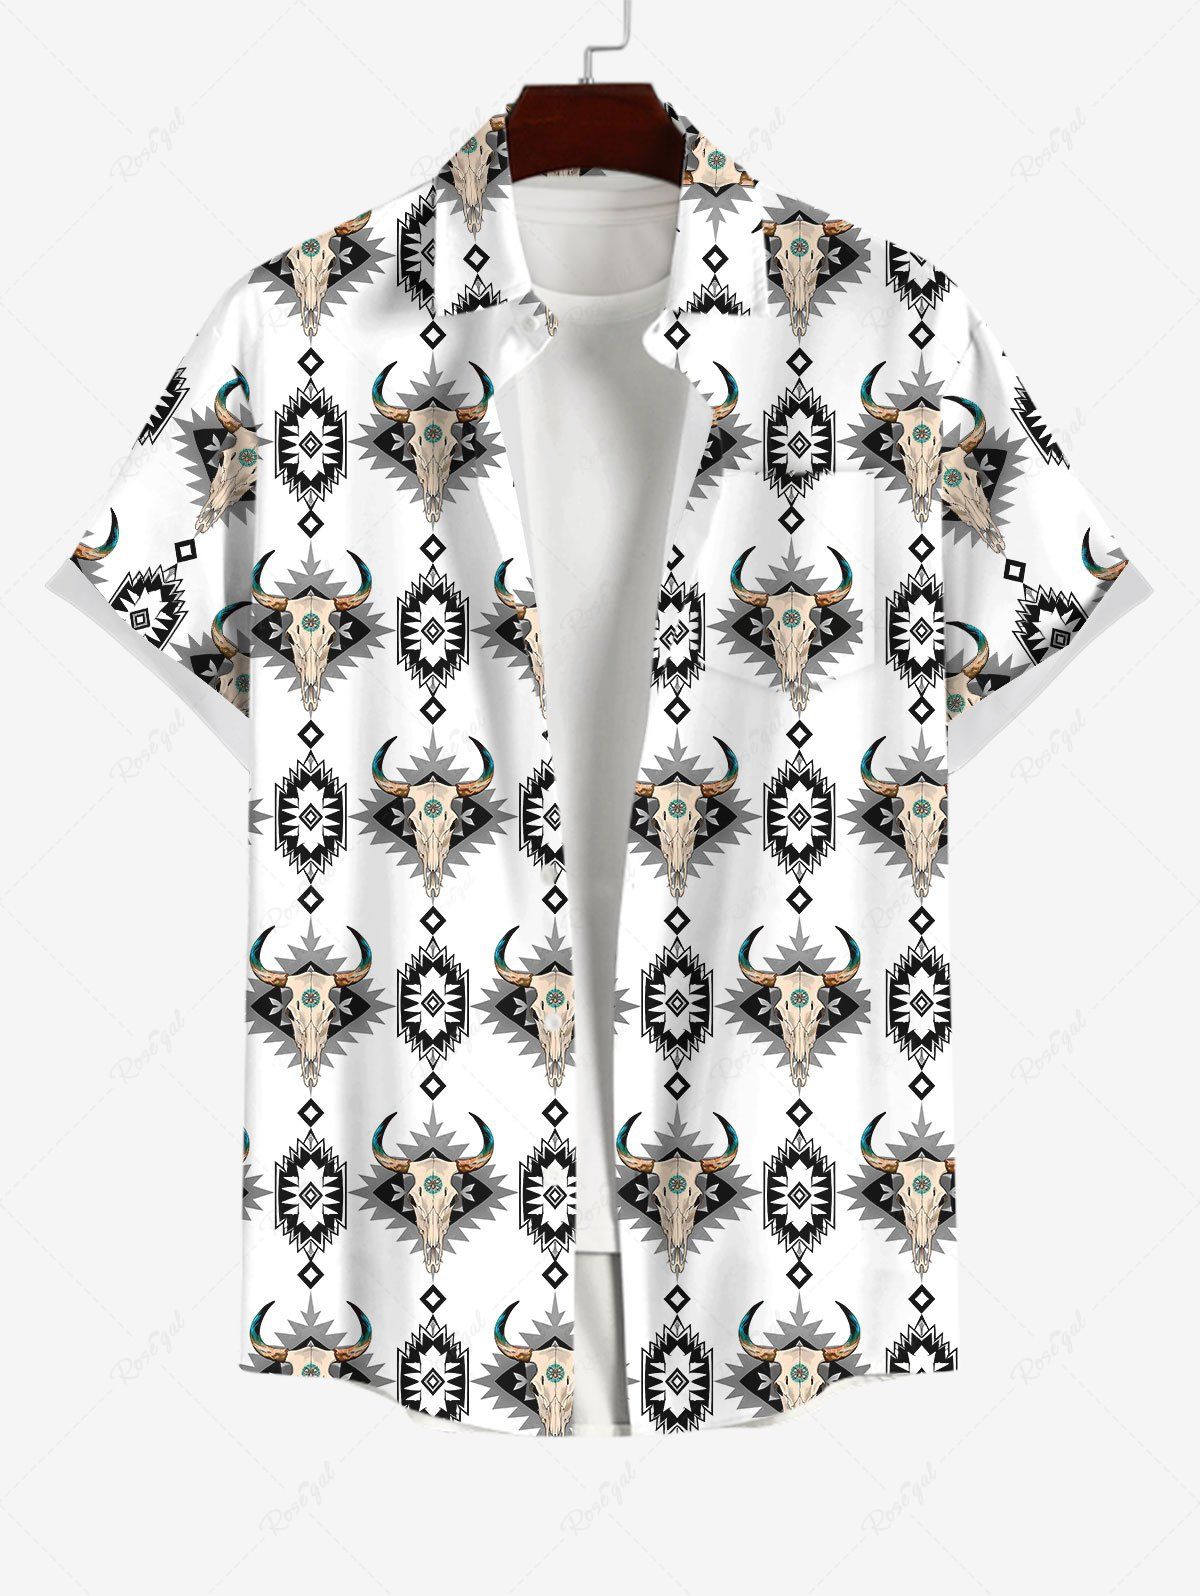 Chic Men's Turn-down Collar Cow Head Ethnic Graphic Print Full Buttons Pocket Shirt  